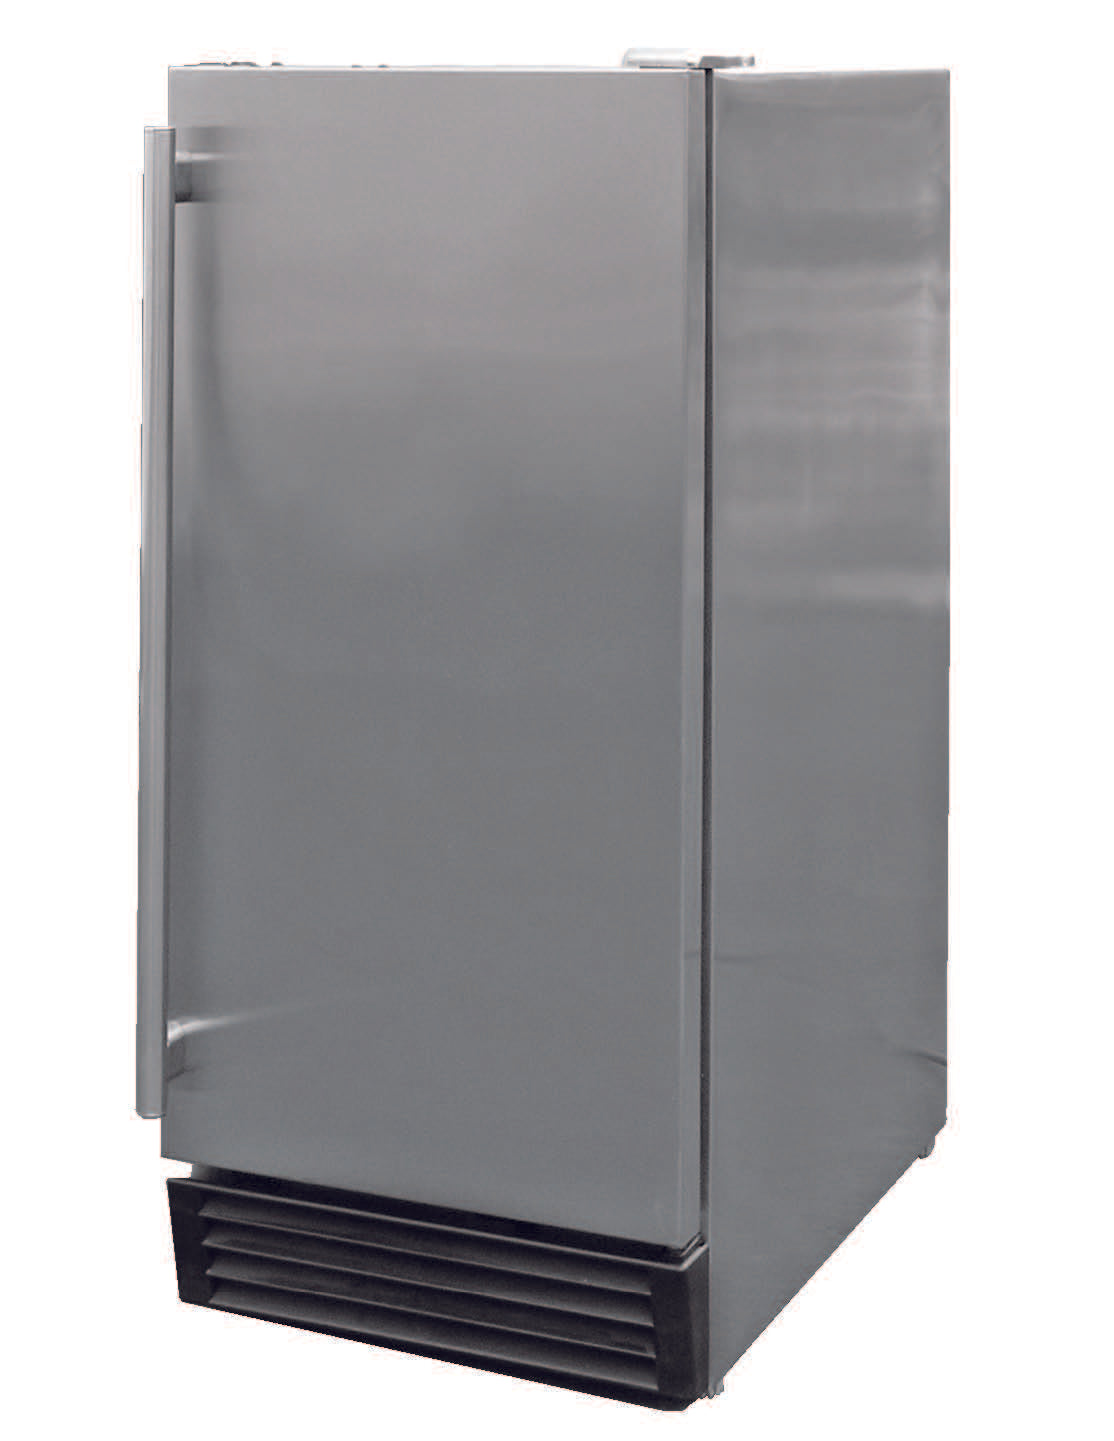 Cal Flame Outdoor Stainless Steel Refrigerator